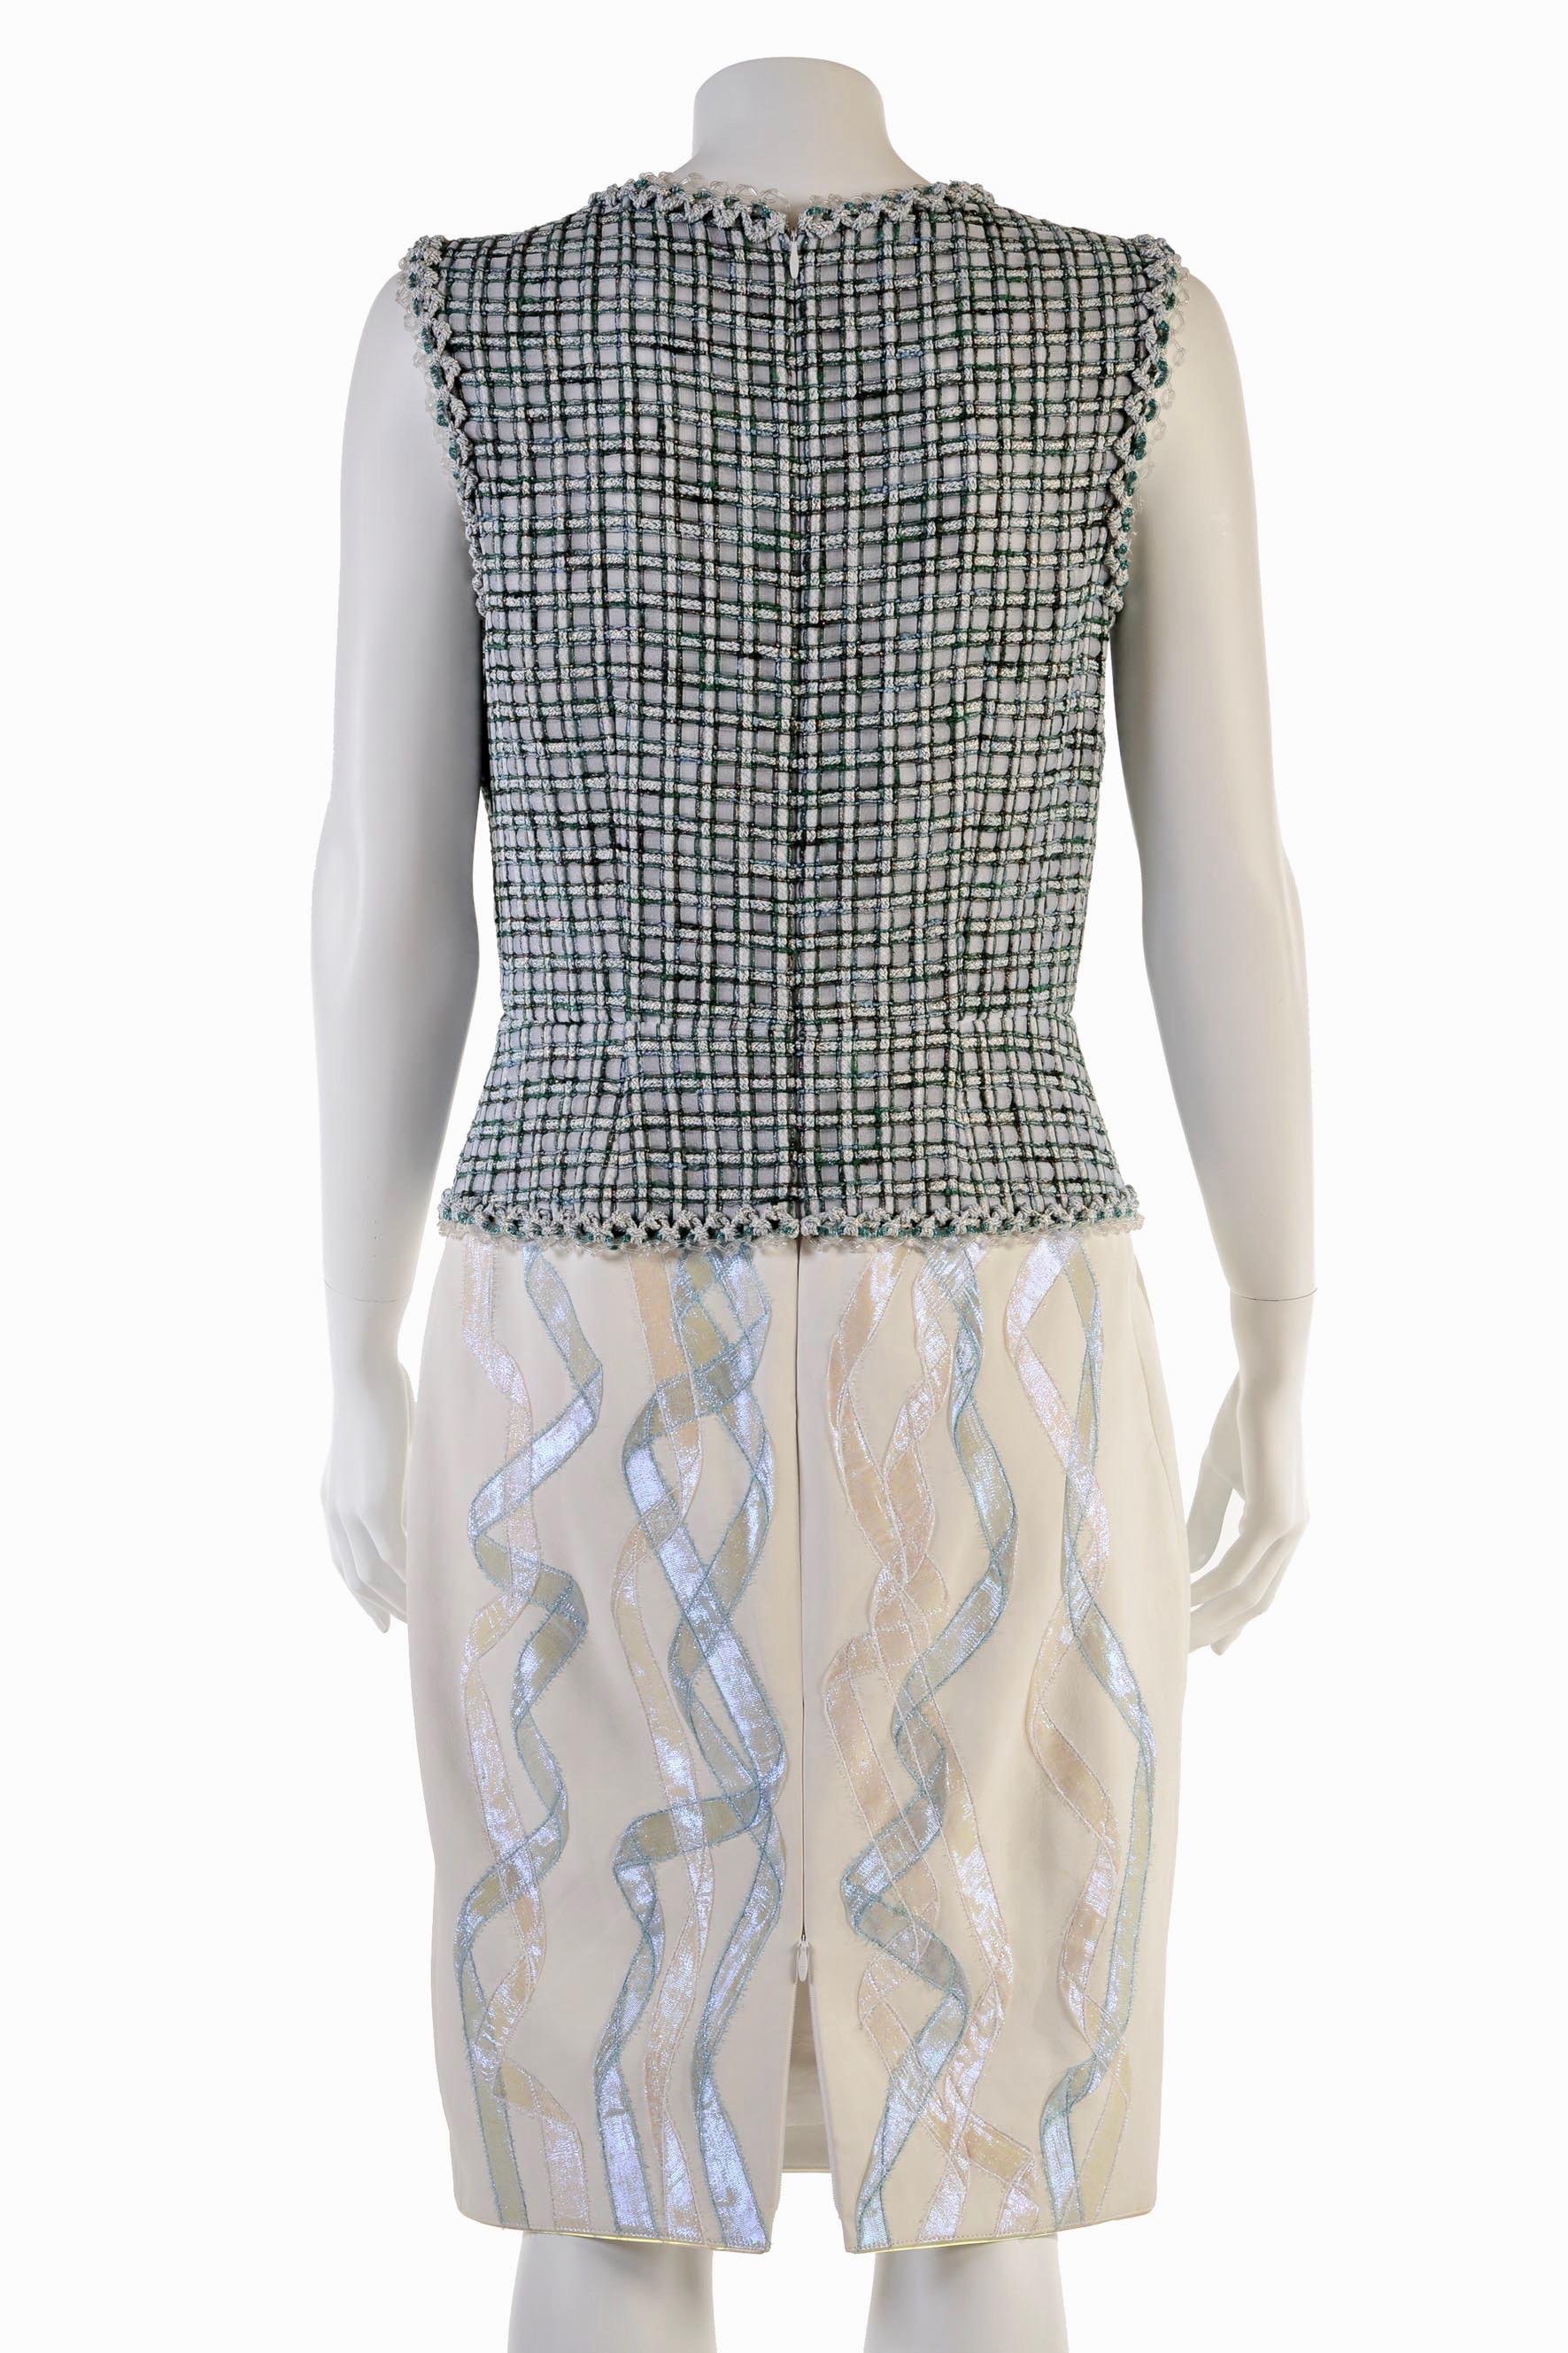 Women's CHANEL  green Lesage and ivory leather dress FR 40  Spring 2012  12P  For Sale